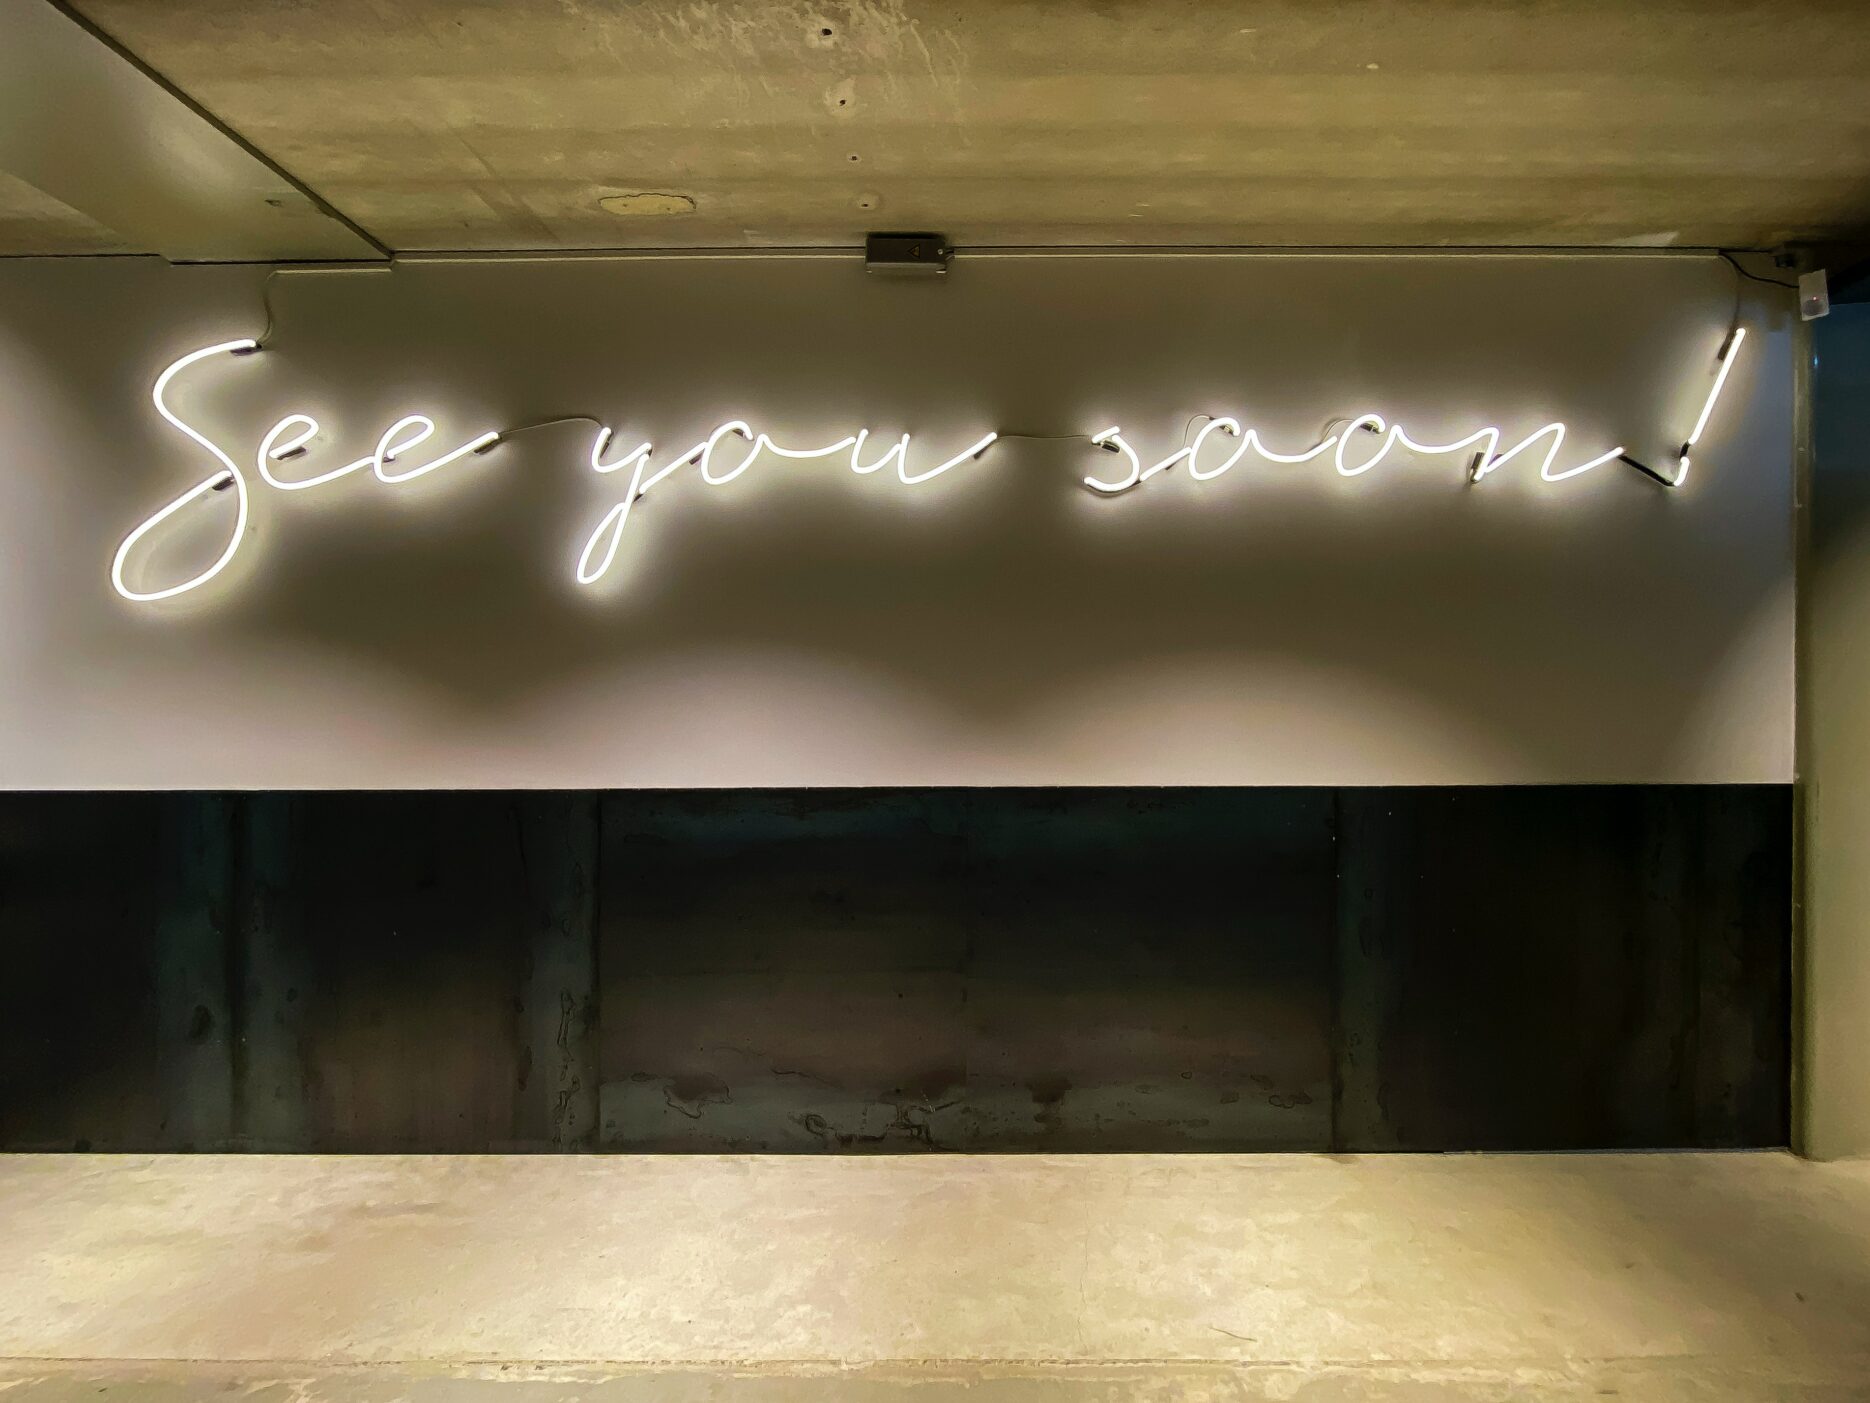 White neon script on a grey wall reads, "See you soon!"